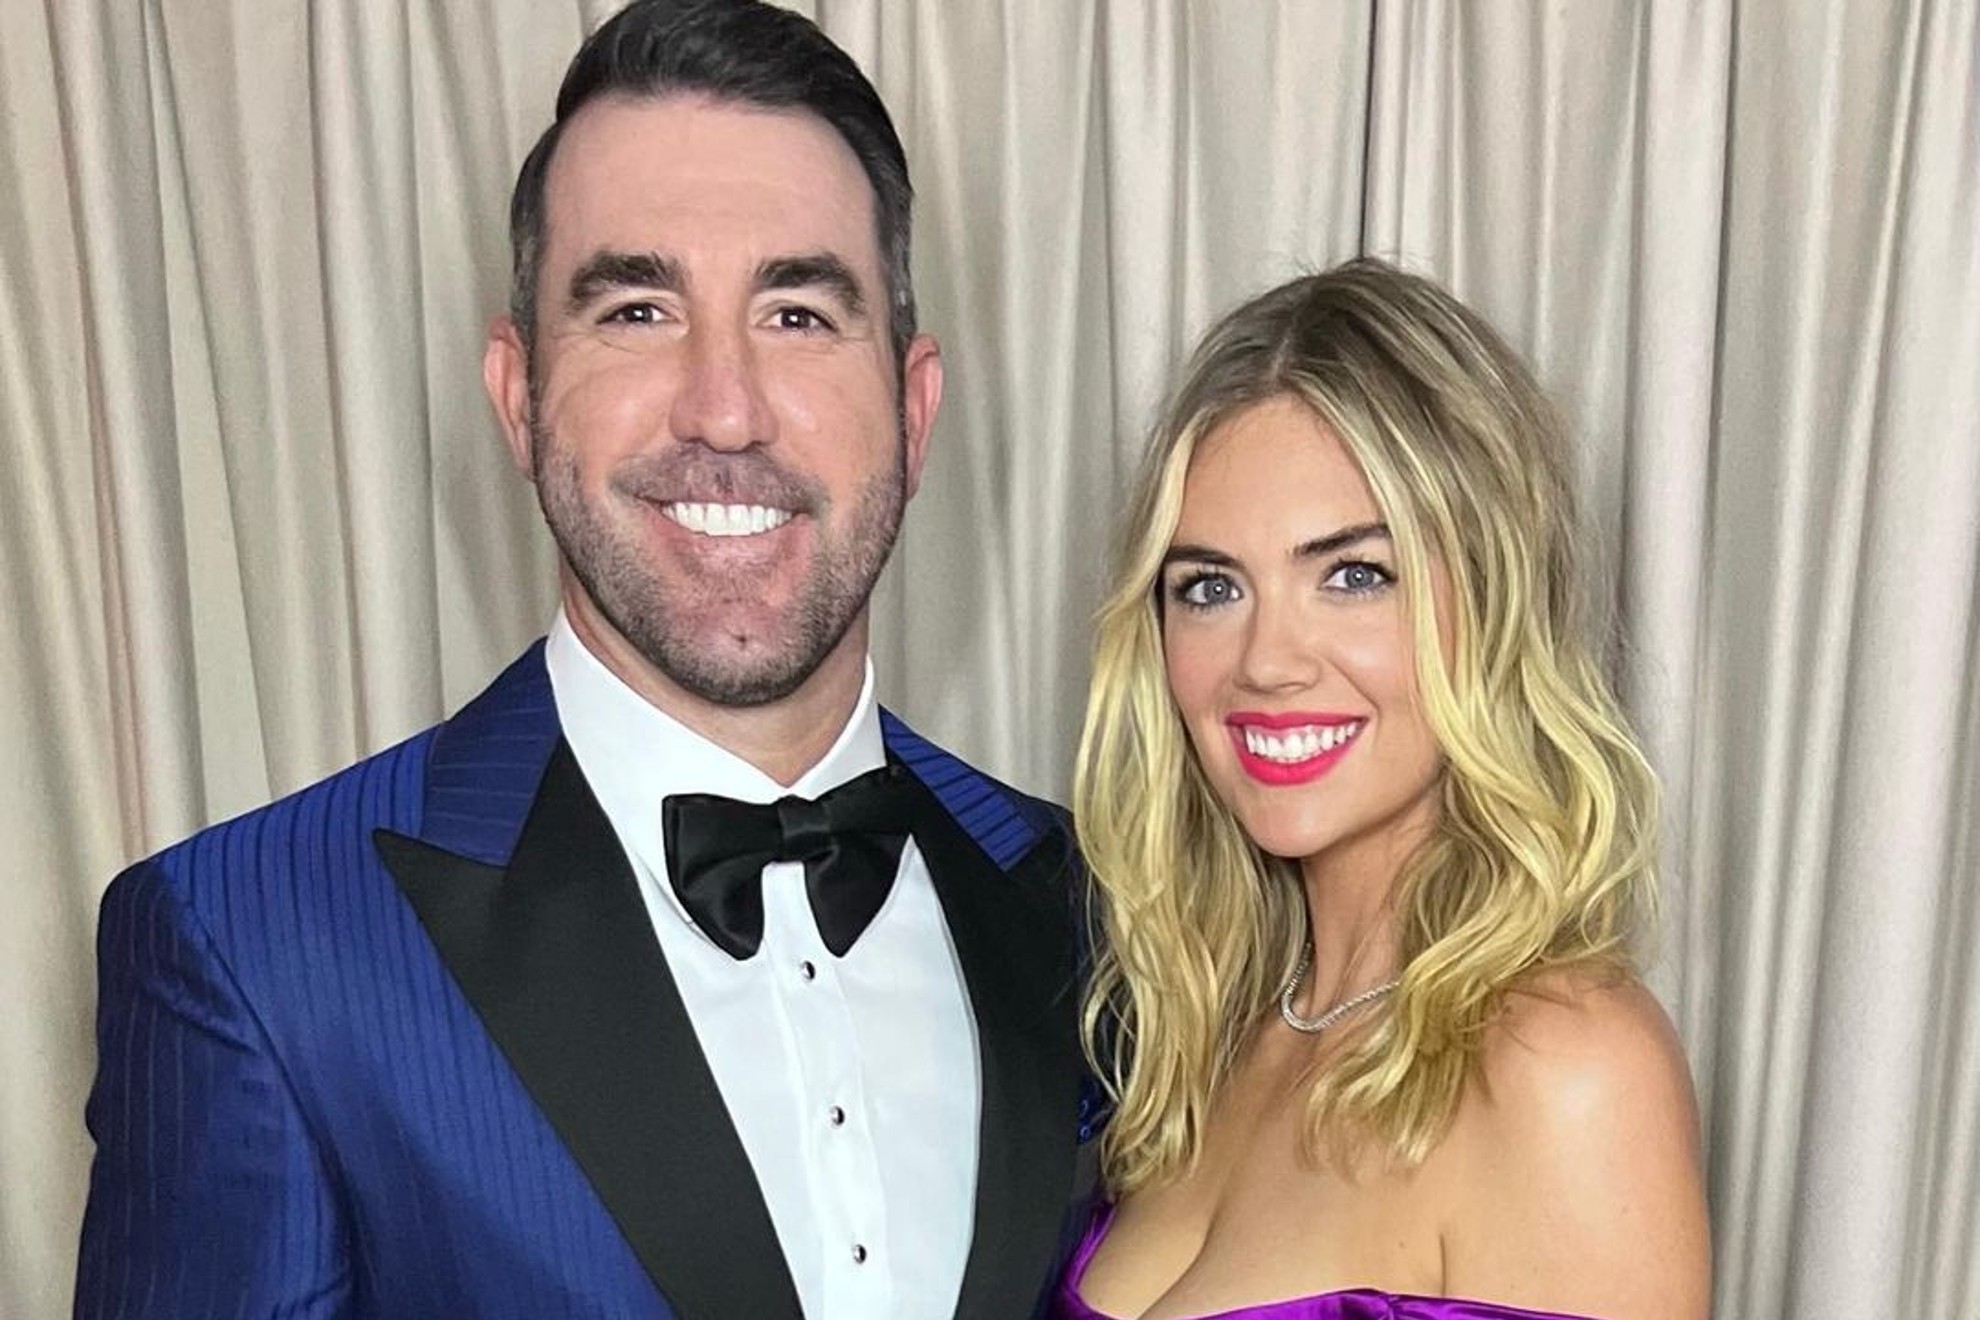 Justin Verlander and his wife, Kate Upton.